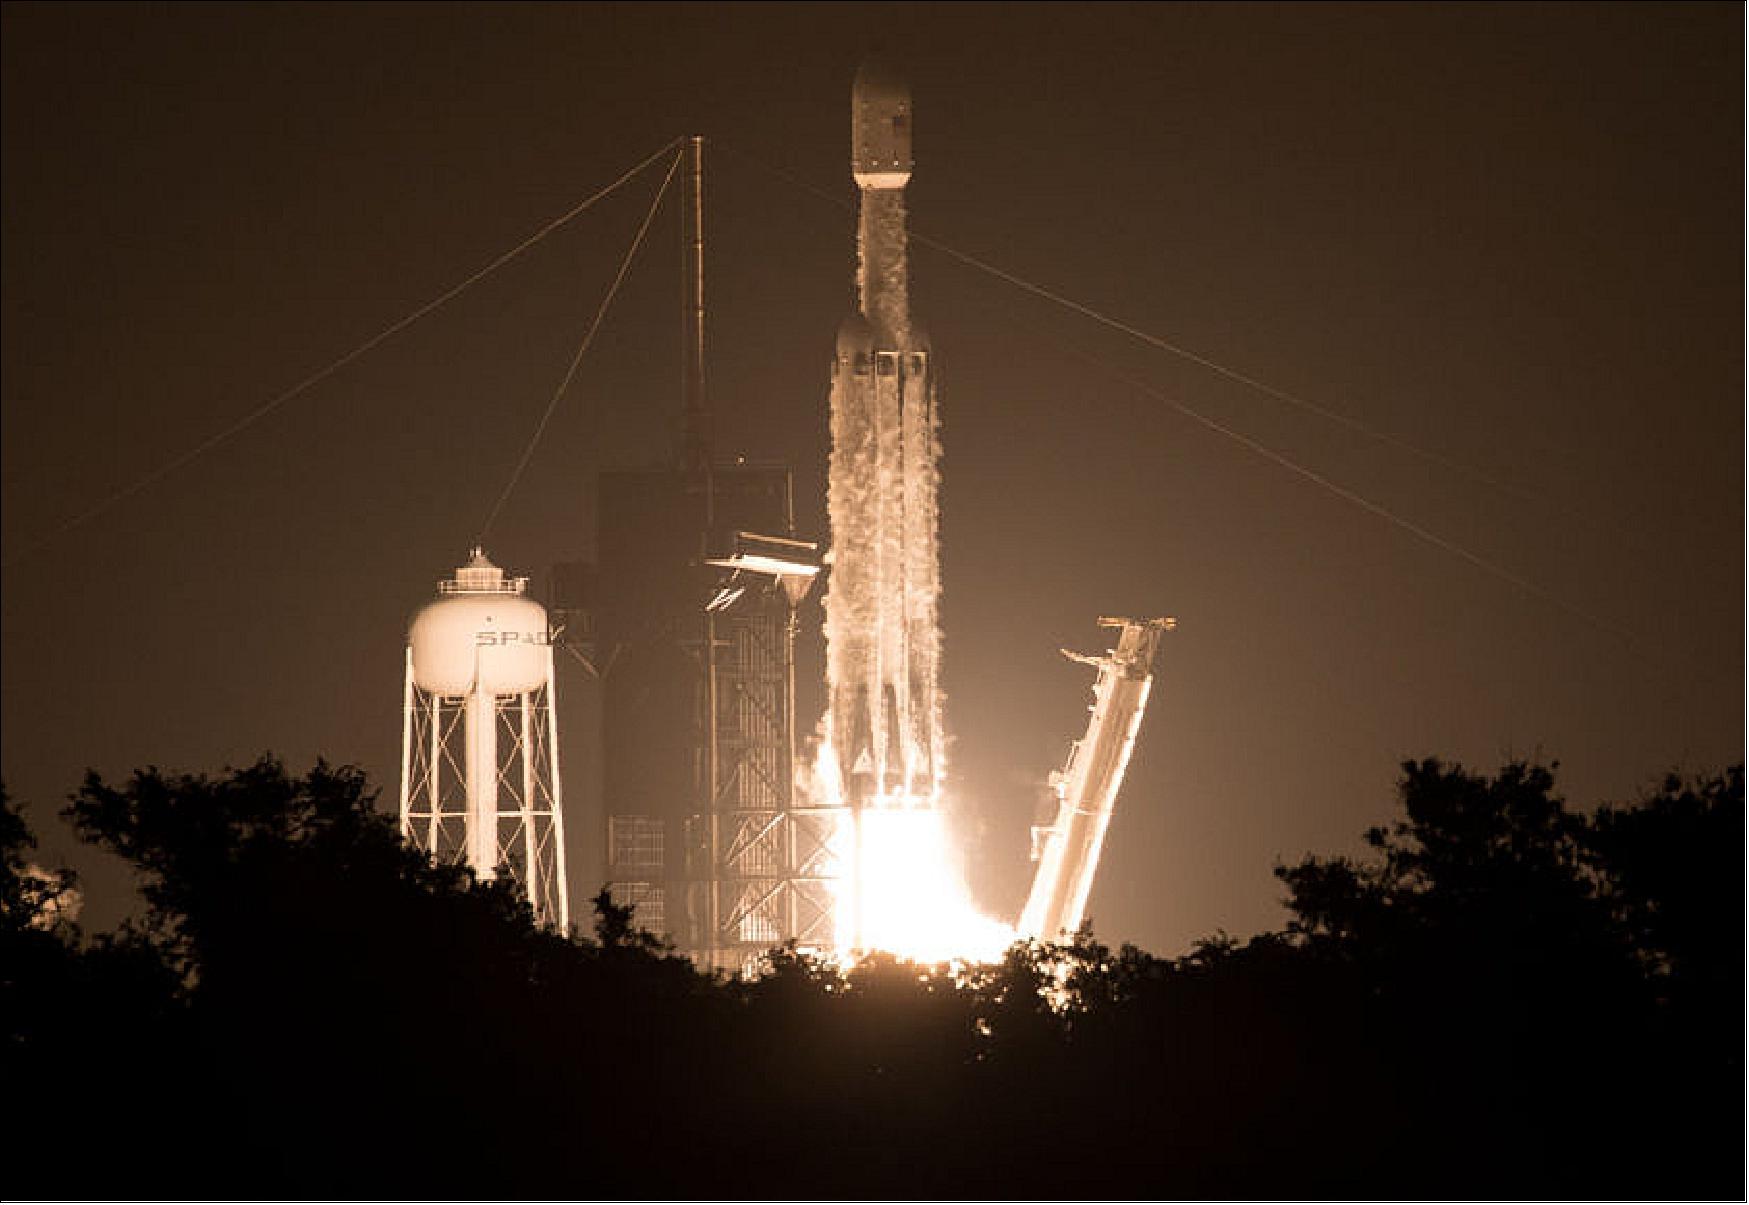 Figure 7: SpaceX's Falcon Heavy rocket, carrying LightSail-2 and 23 other spacecraft for the U.S. Air Force's STP-2 mission, lifts off from Kennedy Space Center on 25 June 2019 at 06:30 UTC (image credit: NASA)